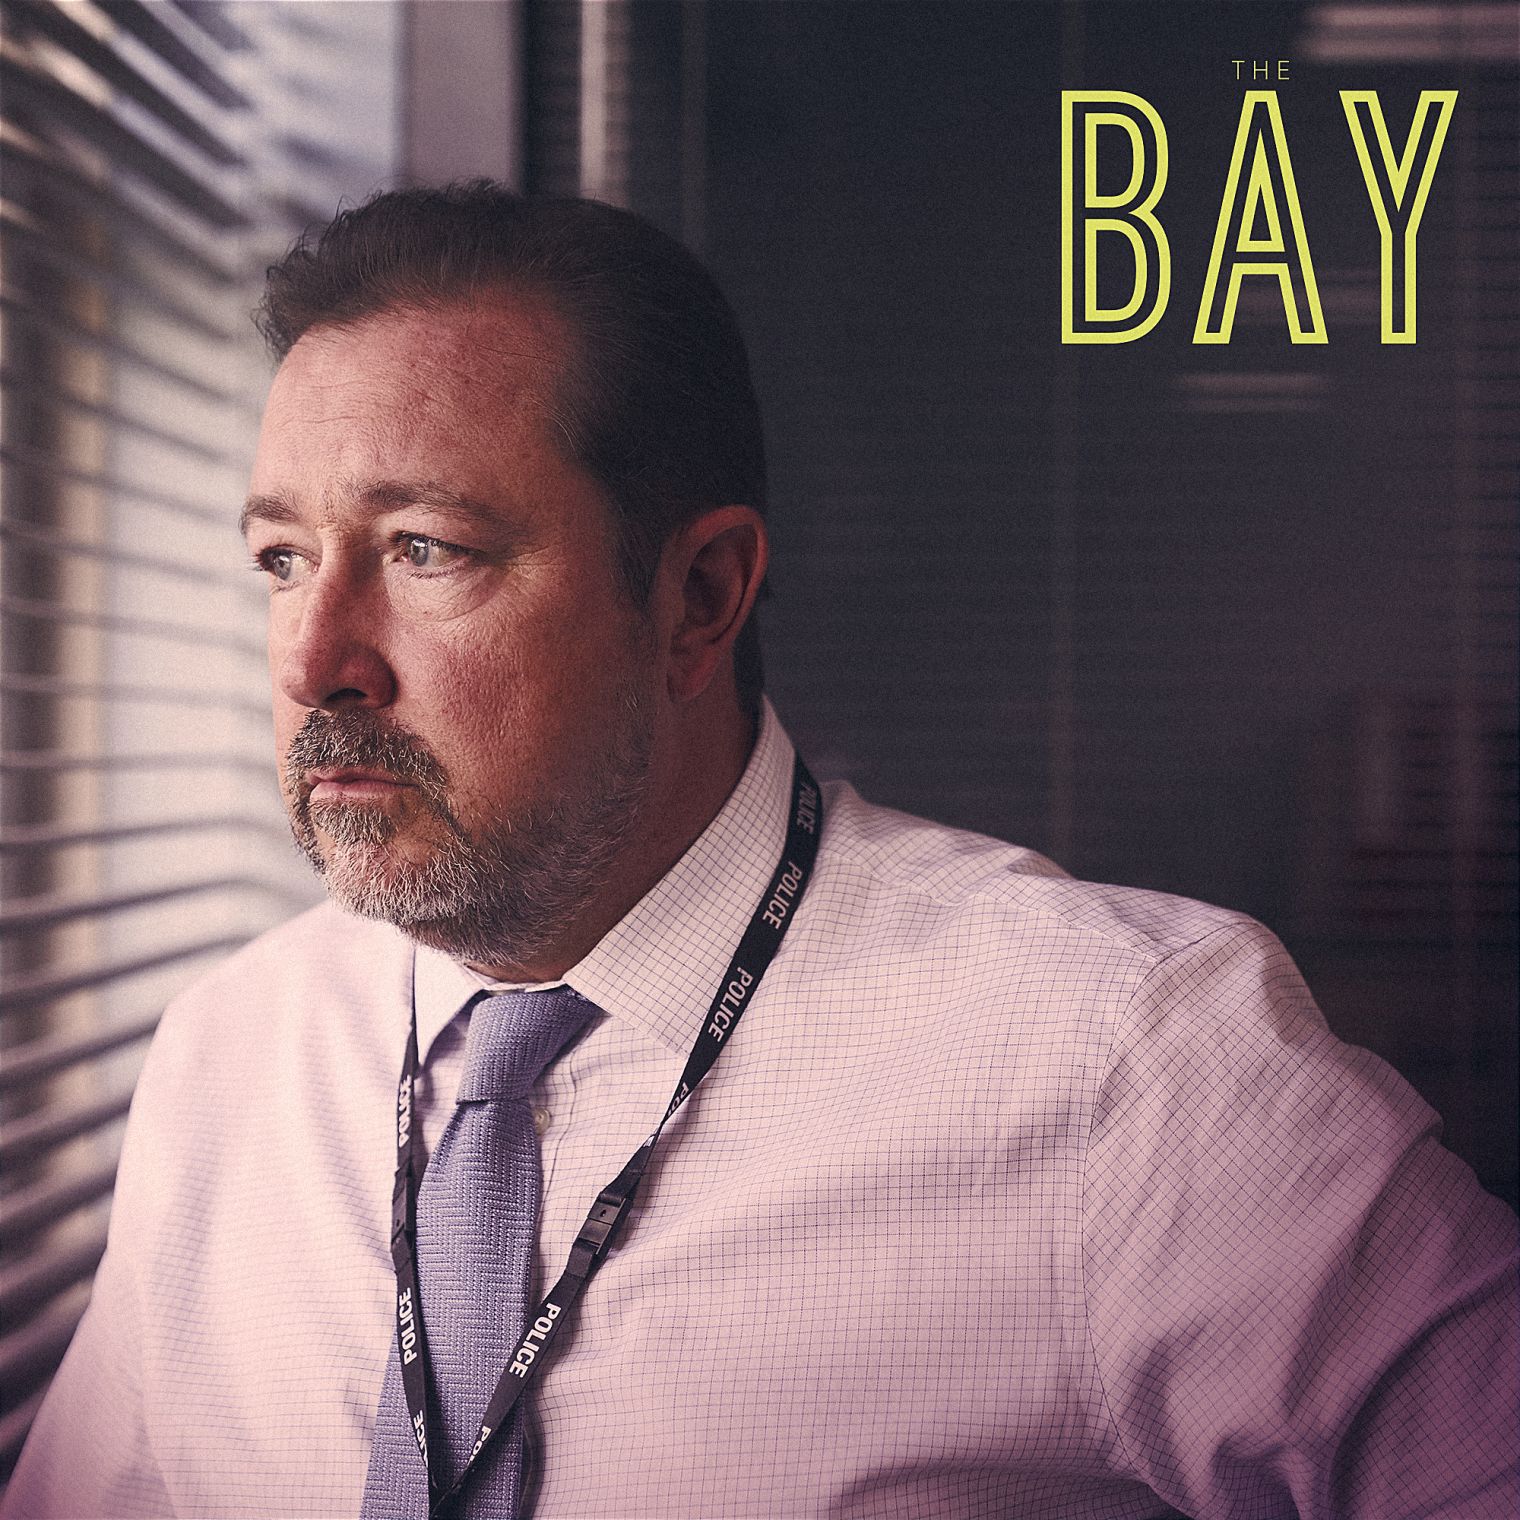 Daniel Ryan is back in Series 4 of The Bay which returns to ITV on Wednesday 8th March